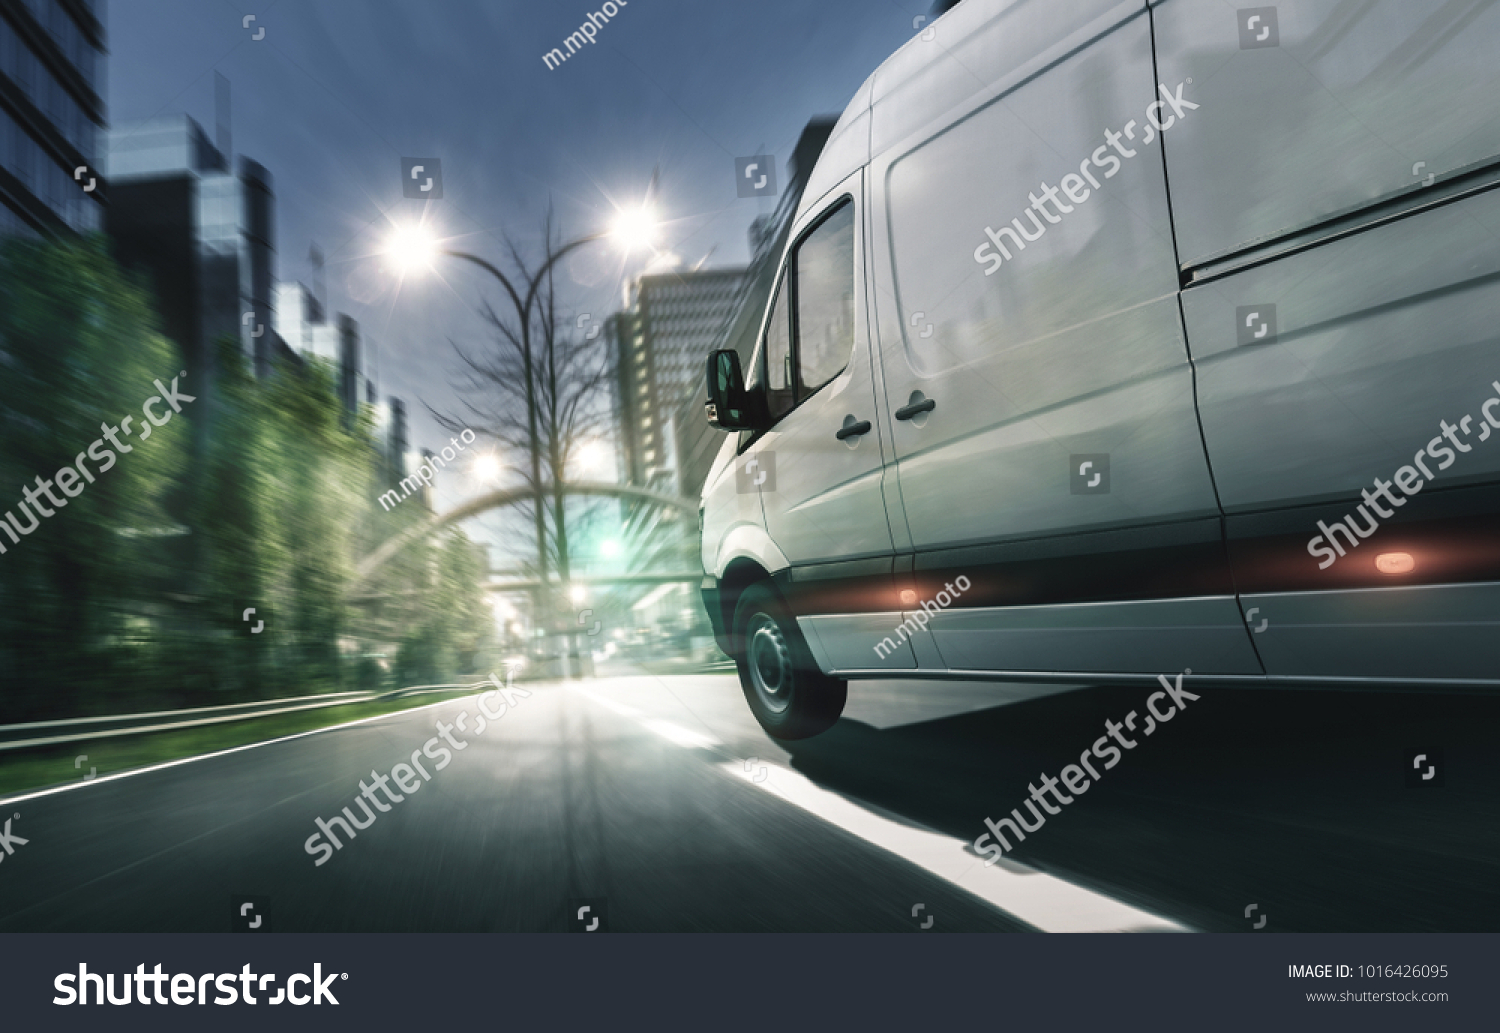 Delivery van drives in illuminated city #1016426095